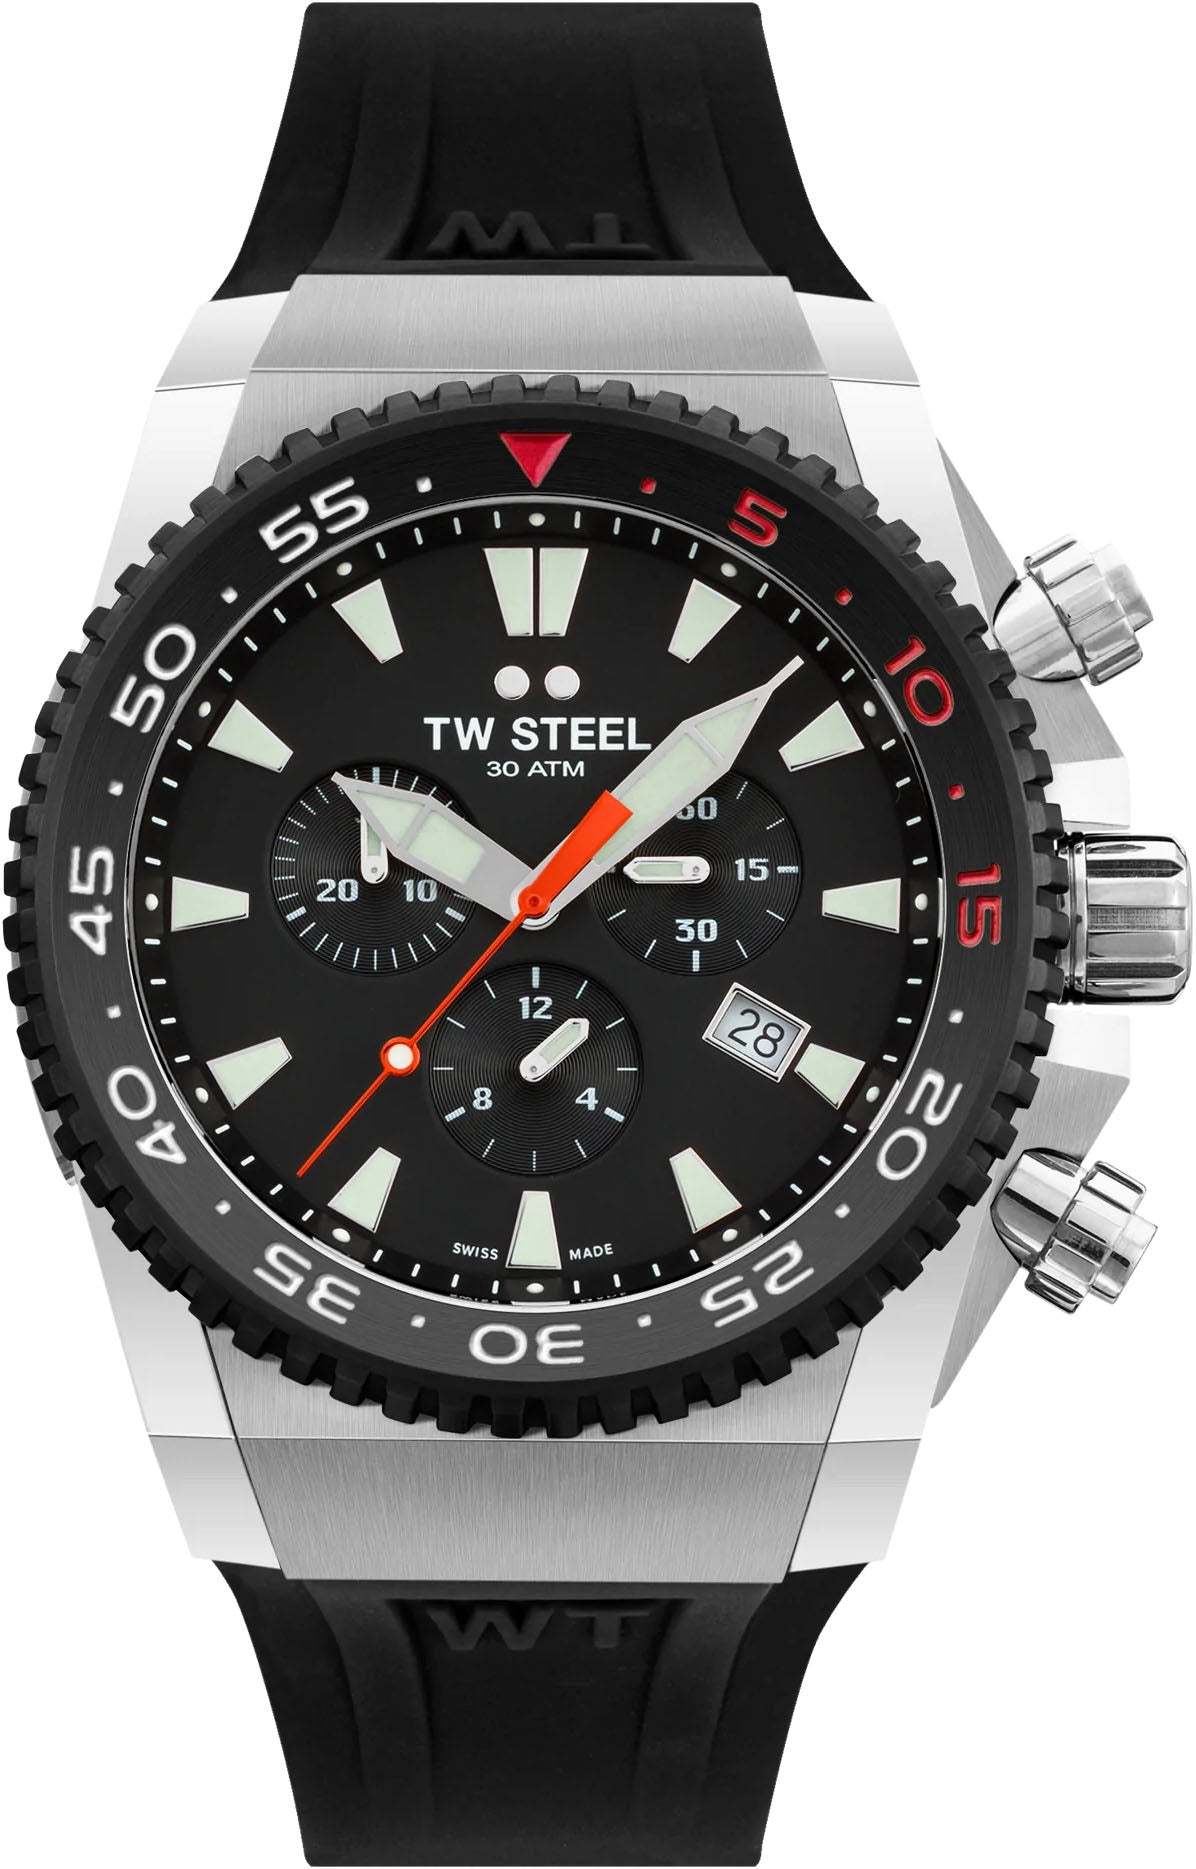 Photos - Wrist Watch TW Steel Watch ACE Diver Limited Edition - Black TW-659 